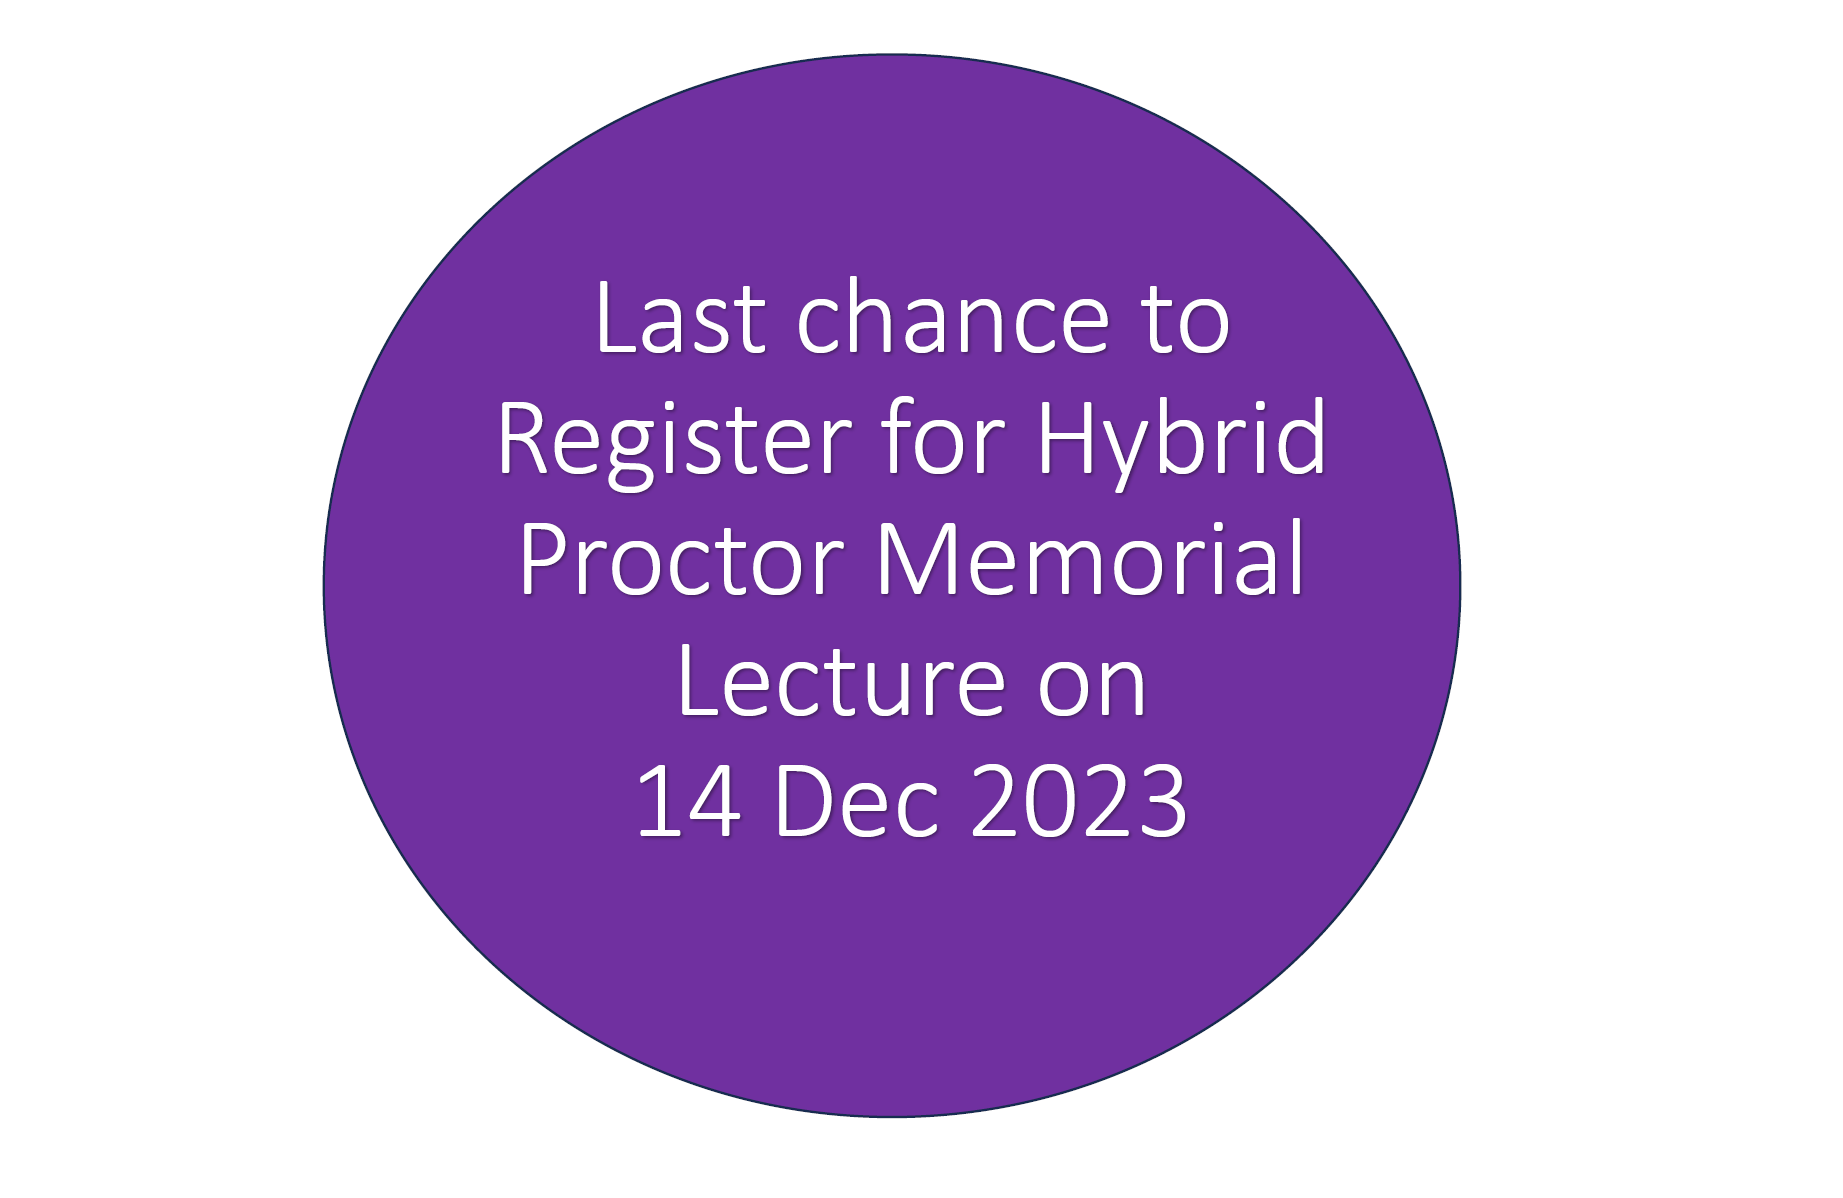 Hybrid Proctor Lecture - last chance to Register!